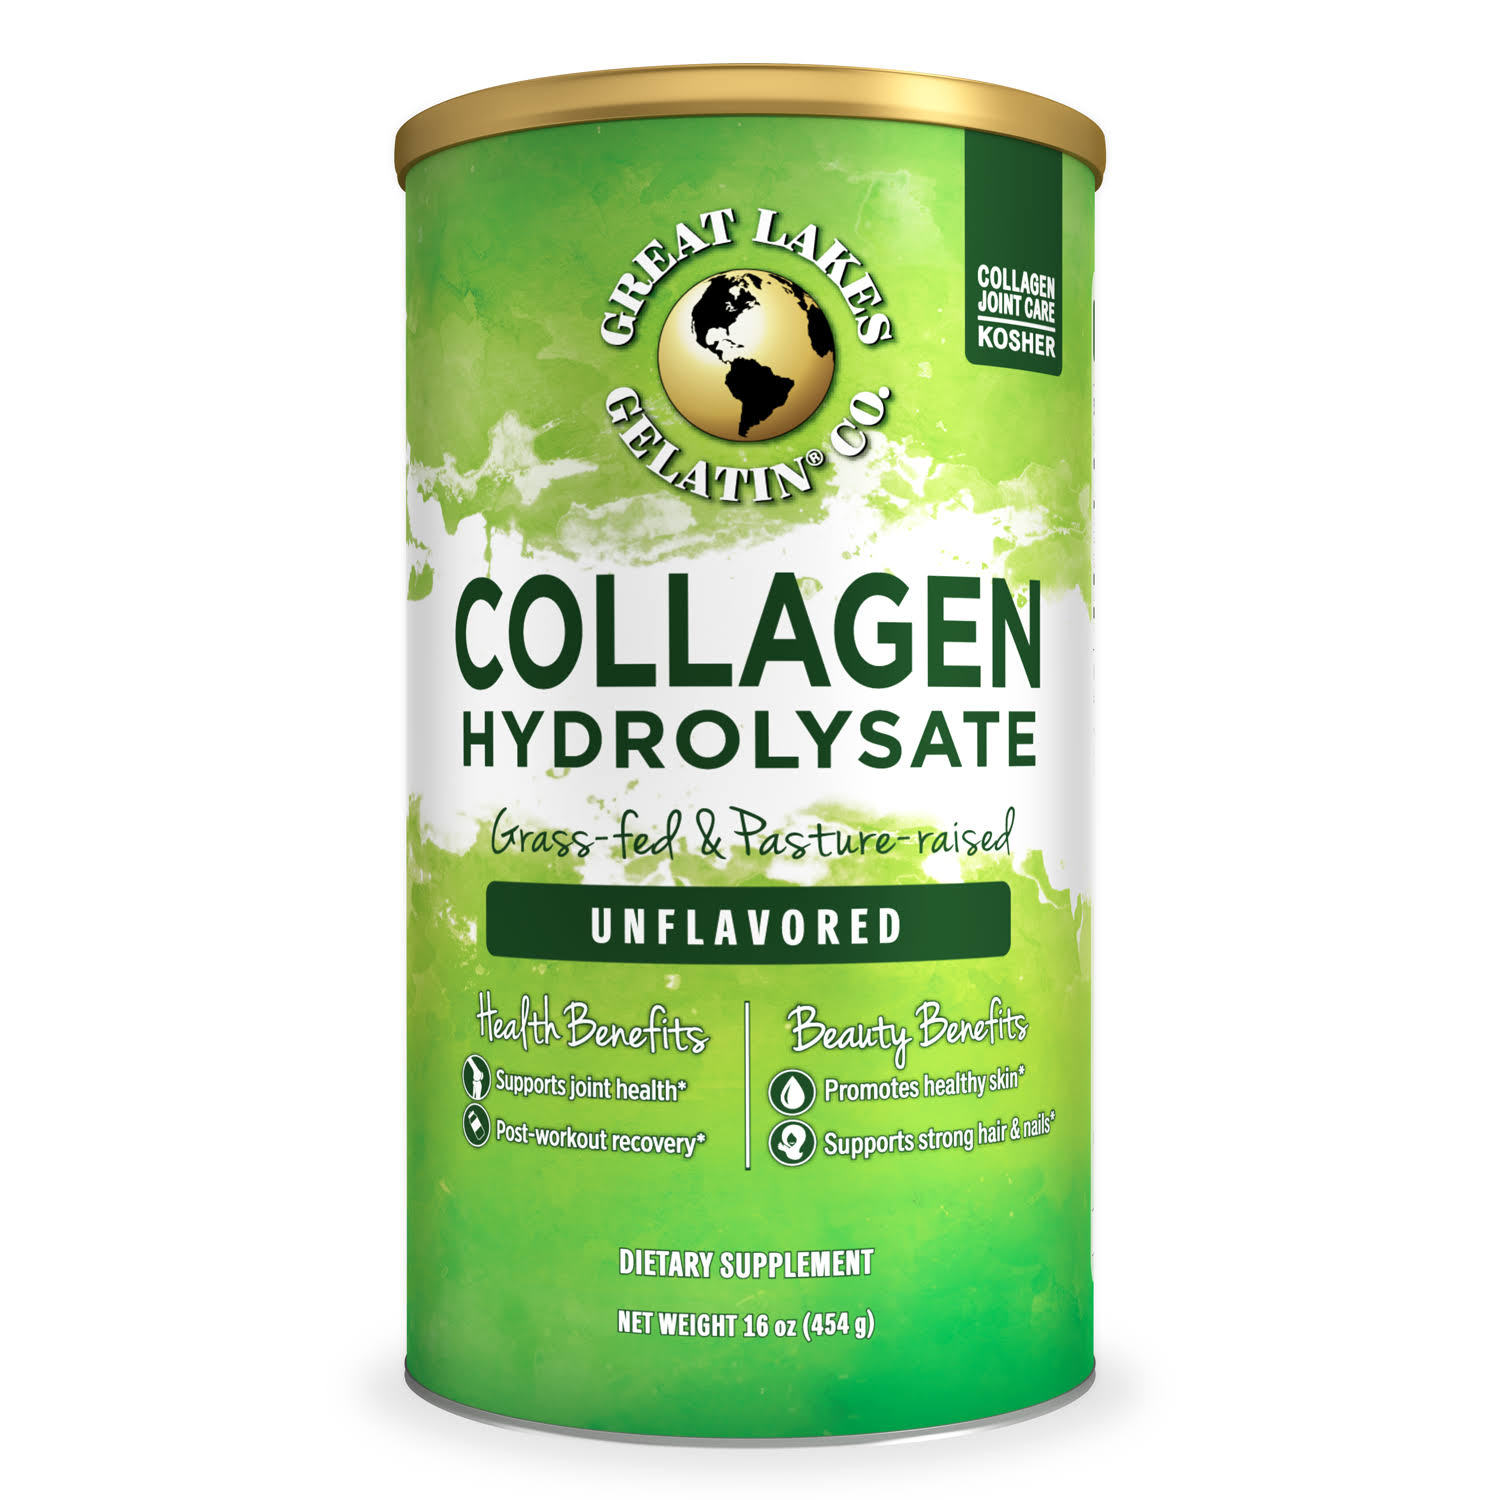 20 Great Lakes 347931 Collagen Hydrolysate SS, 0.42 oz ($1.59 @ 20 min)